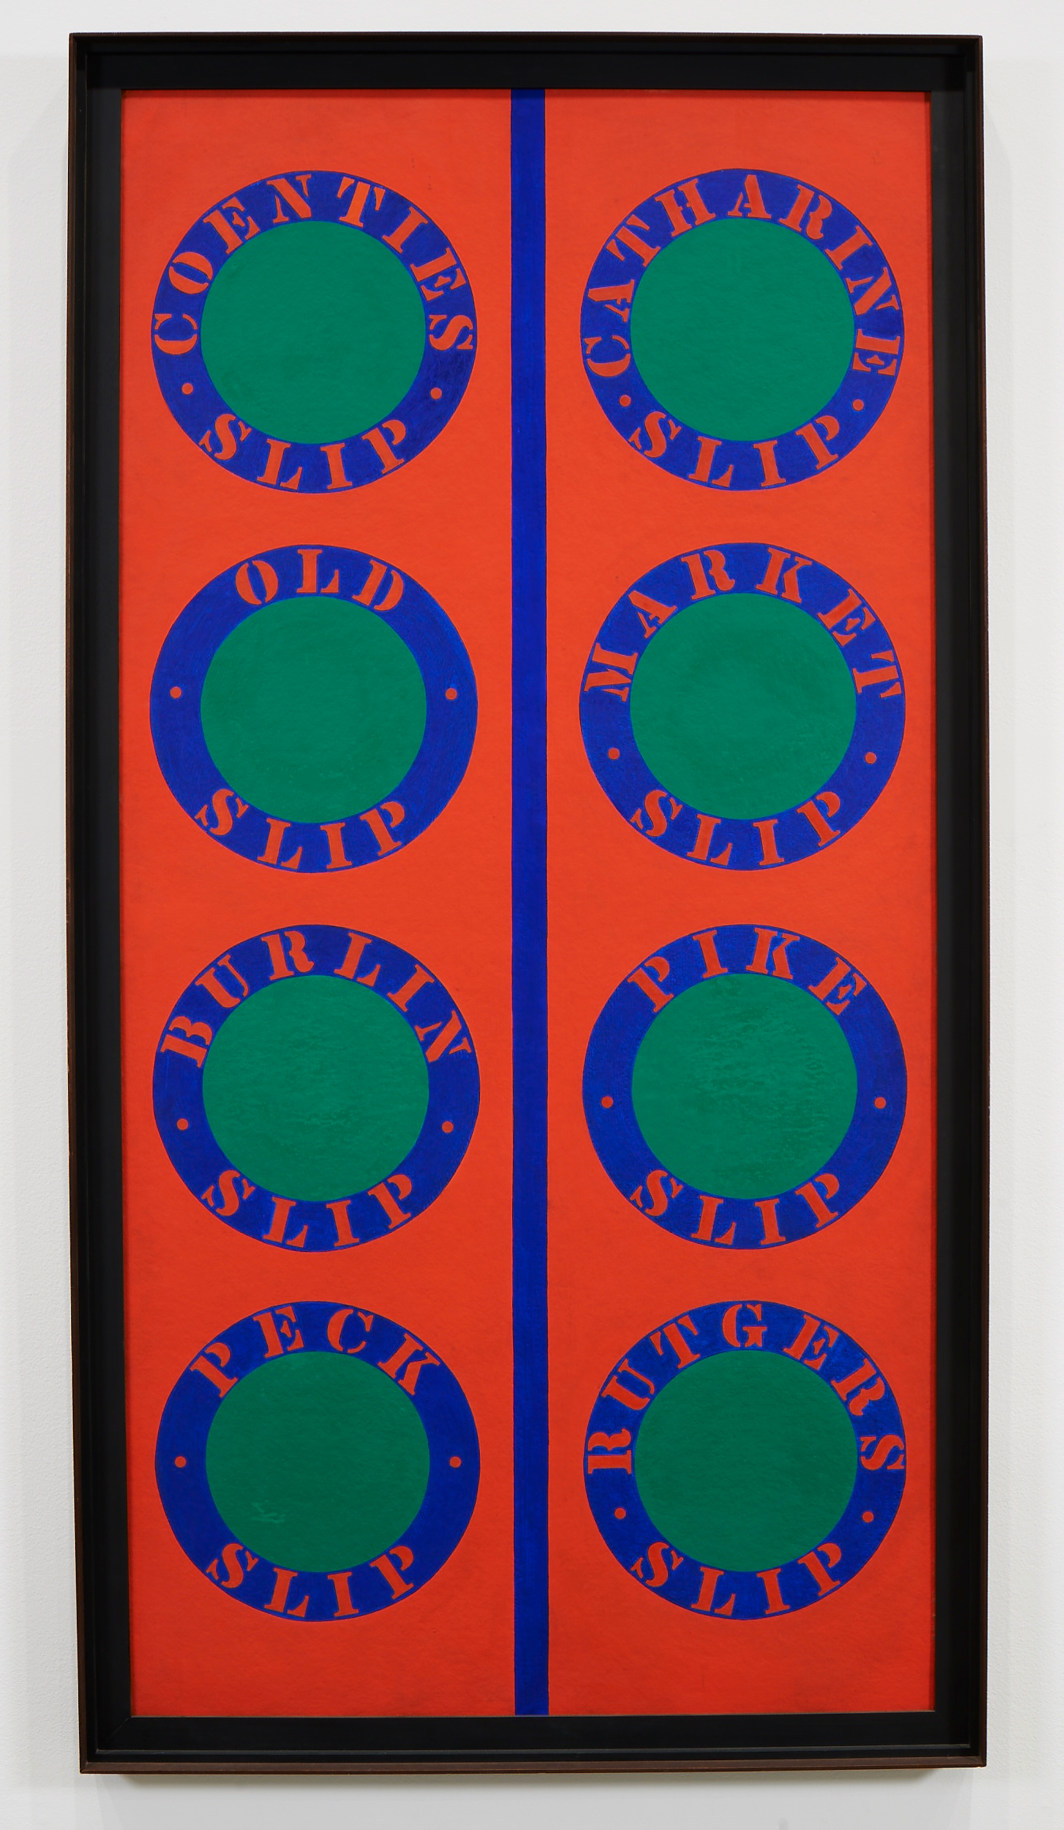 The Slips, a red painting with two vertical rows of four orbs, separated by a blue stripe down the center of the work. The orbs are green, surrounded by a blue ring with red text. Each ring contains the name of a slip in Indiana's Lower Manhattan.